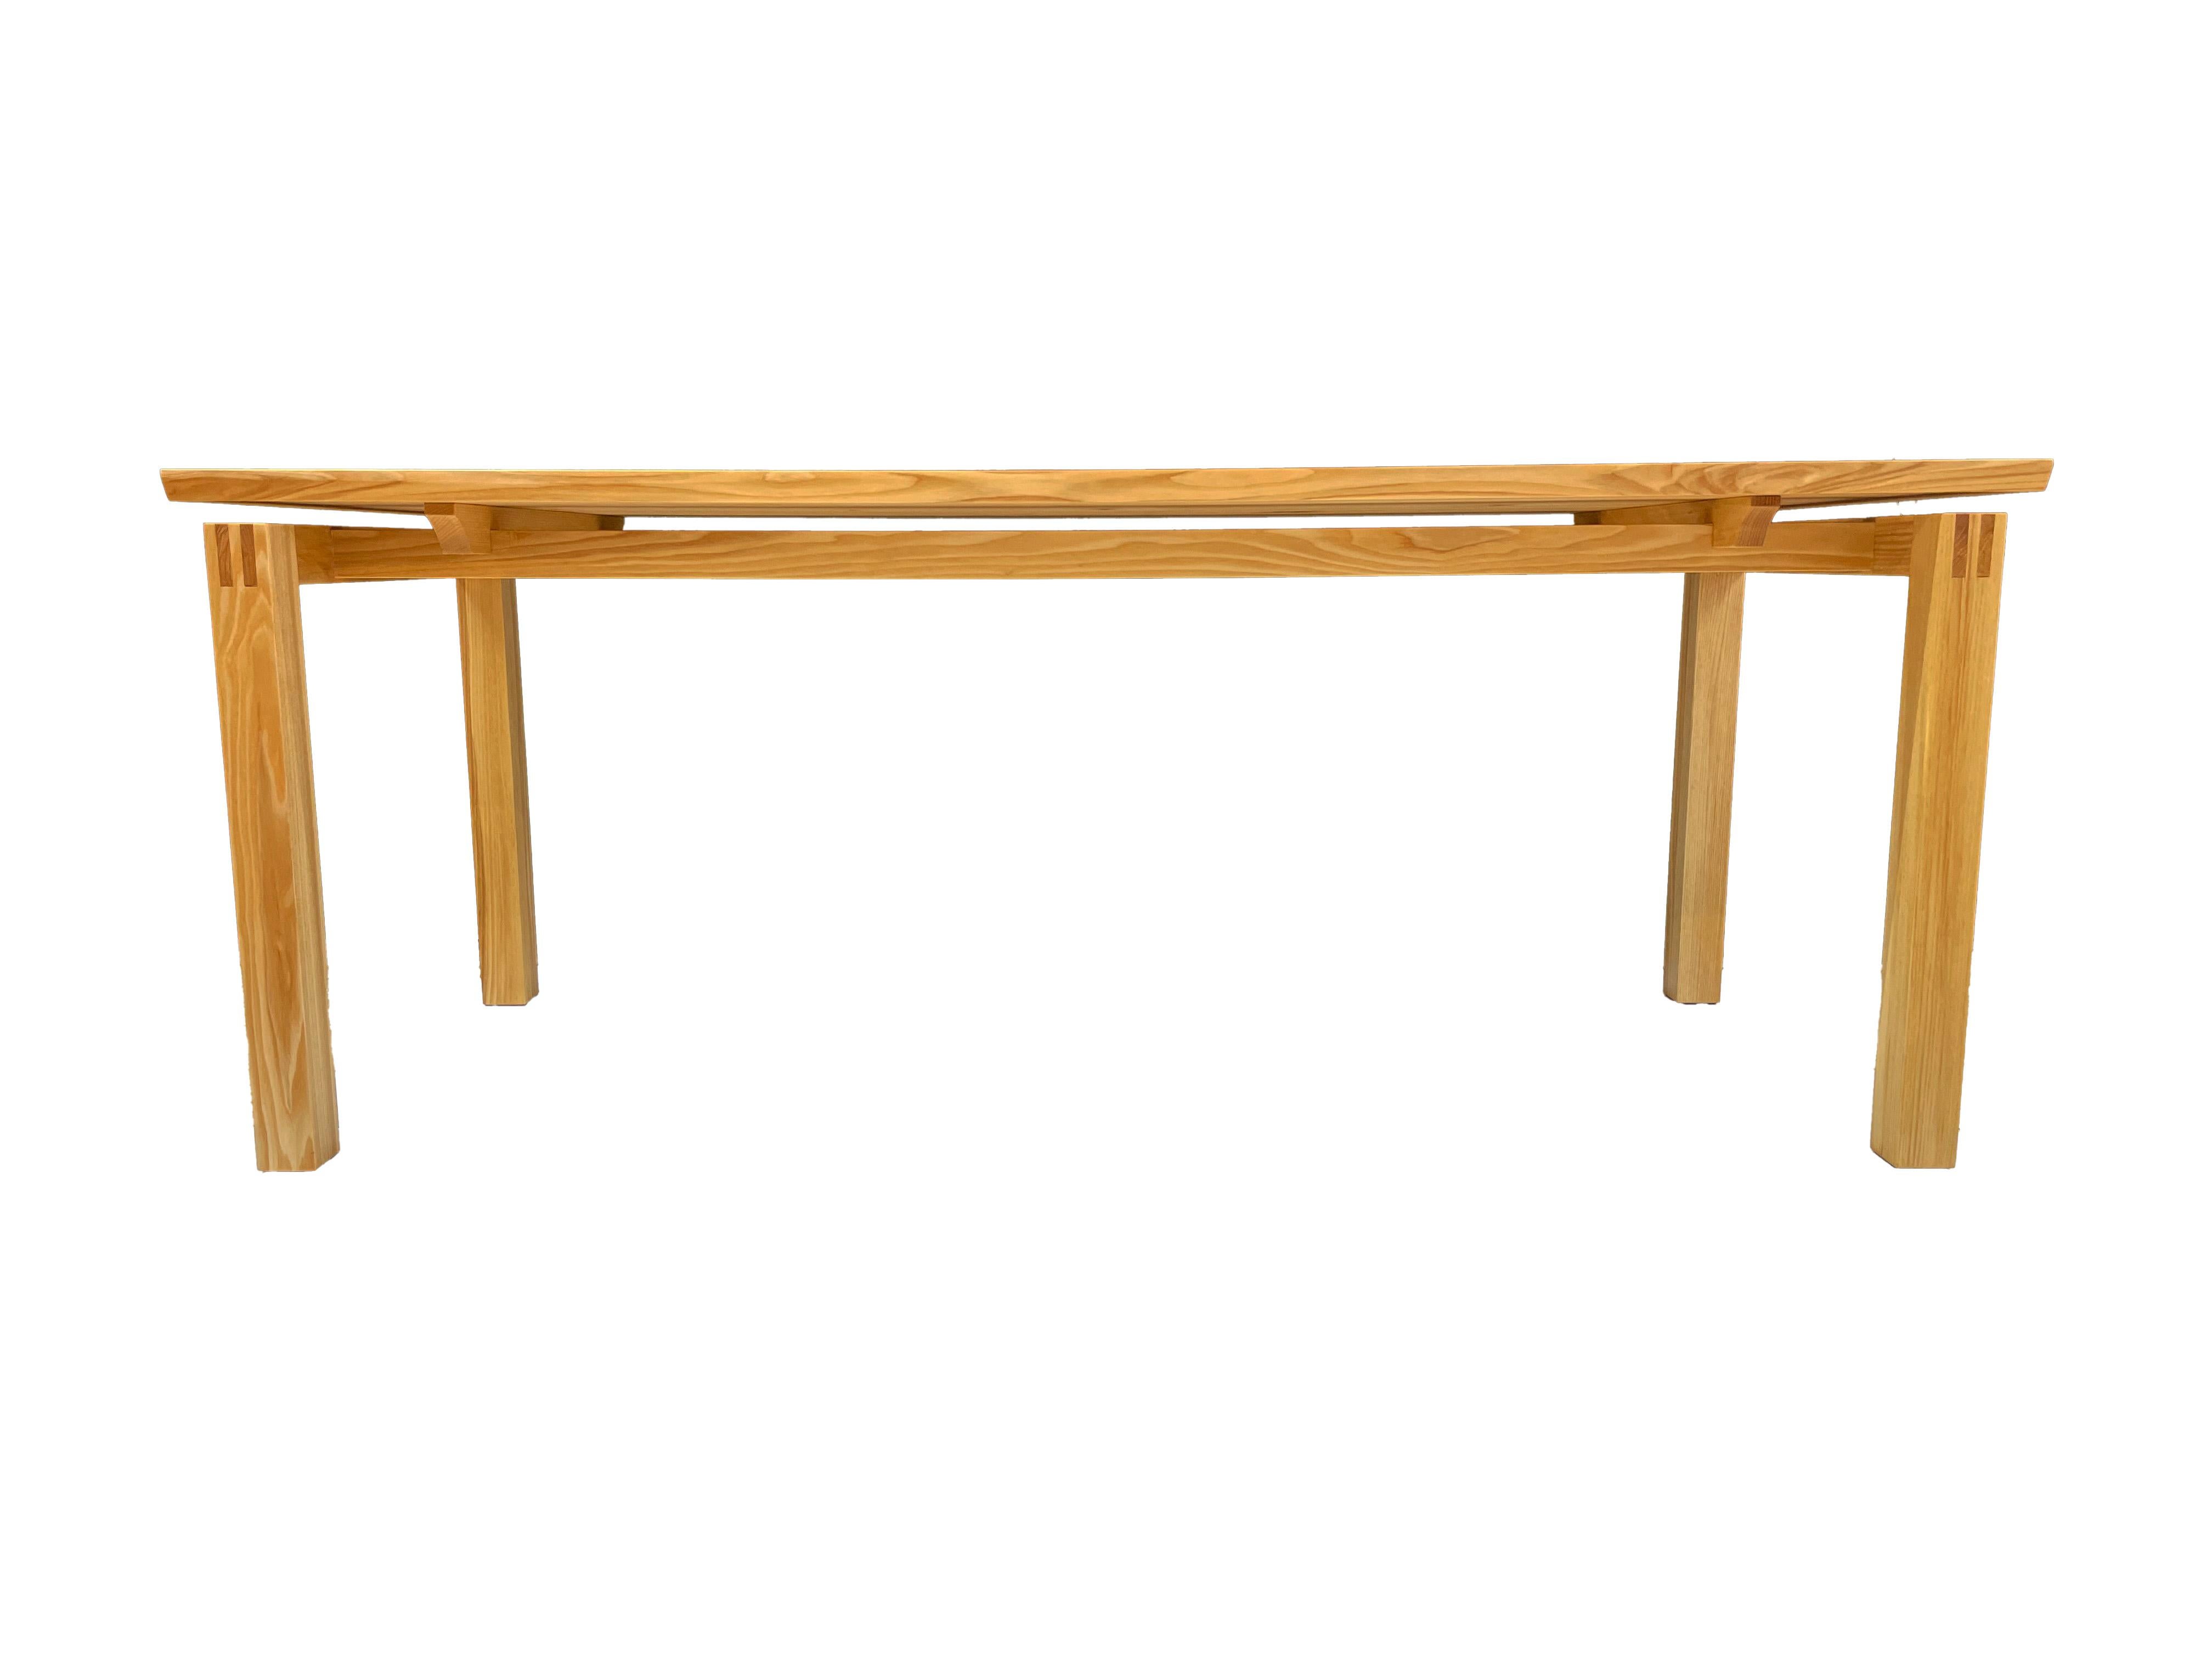 This beautiful and modern dining table is handmade by us. The connection of the legs is a mortise and tenon connection. 

The table is also suitable as a desk.

On request, the table is available in different woods, dimensions and surfaces. In the